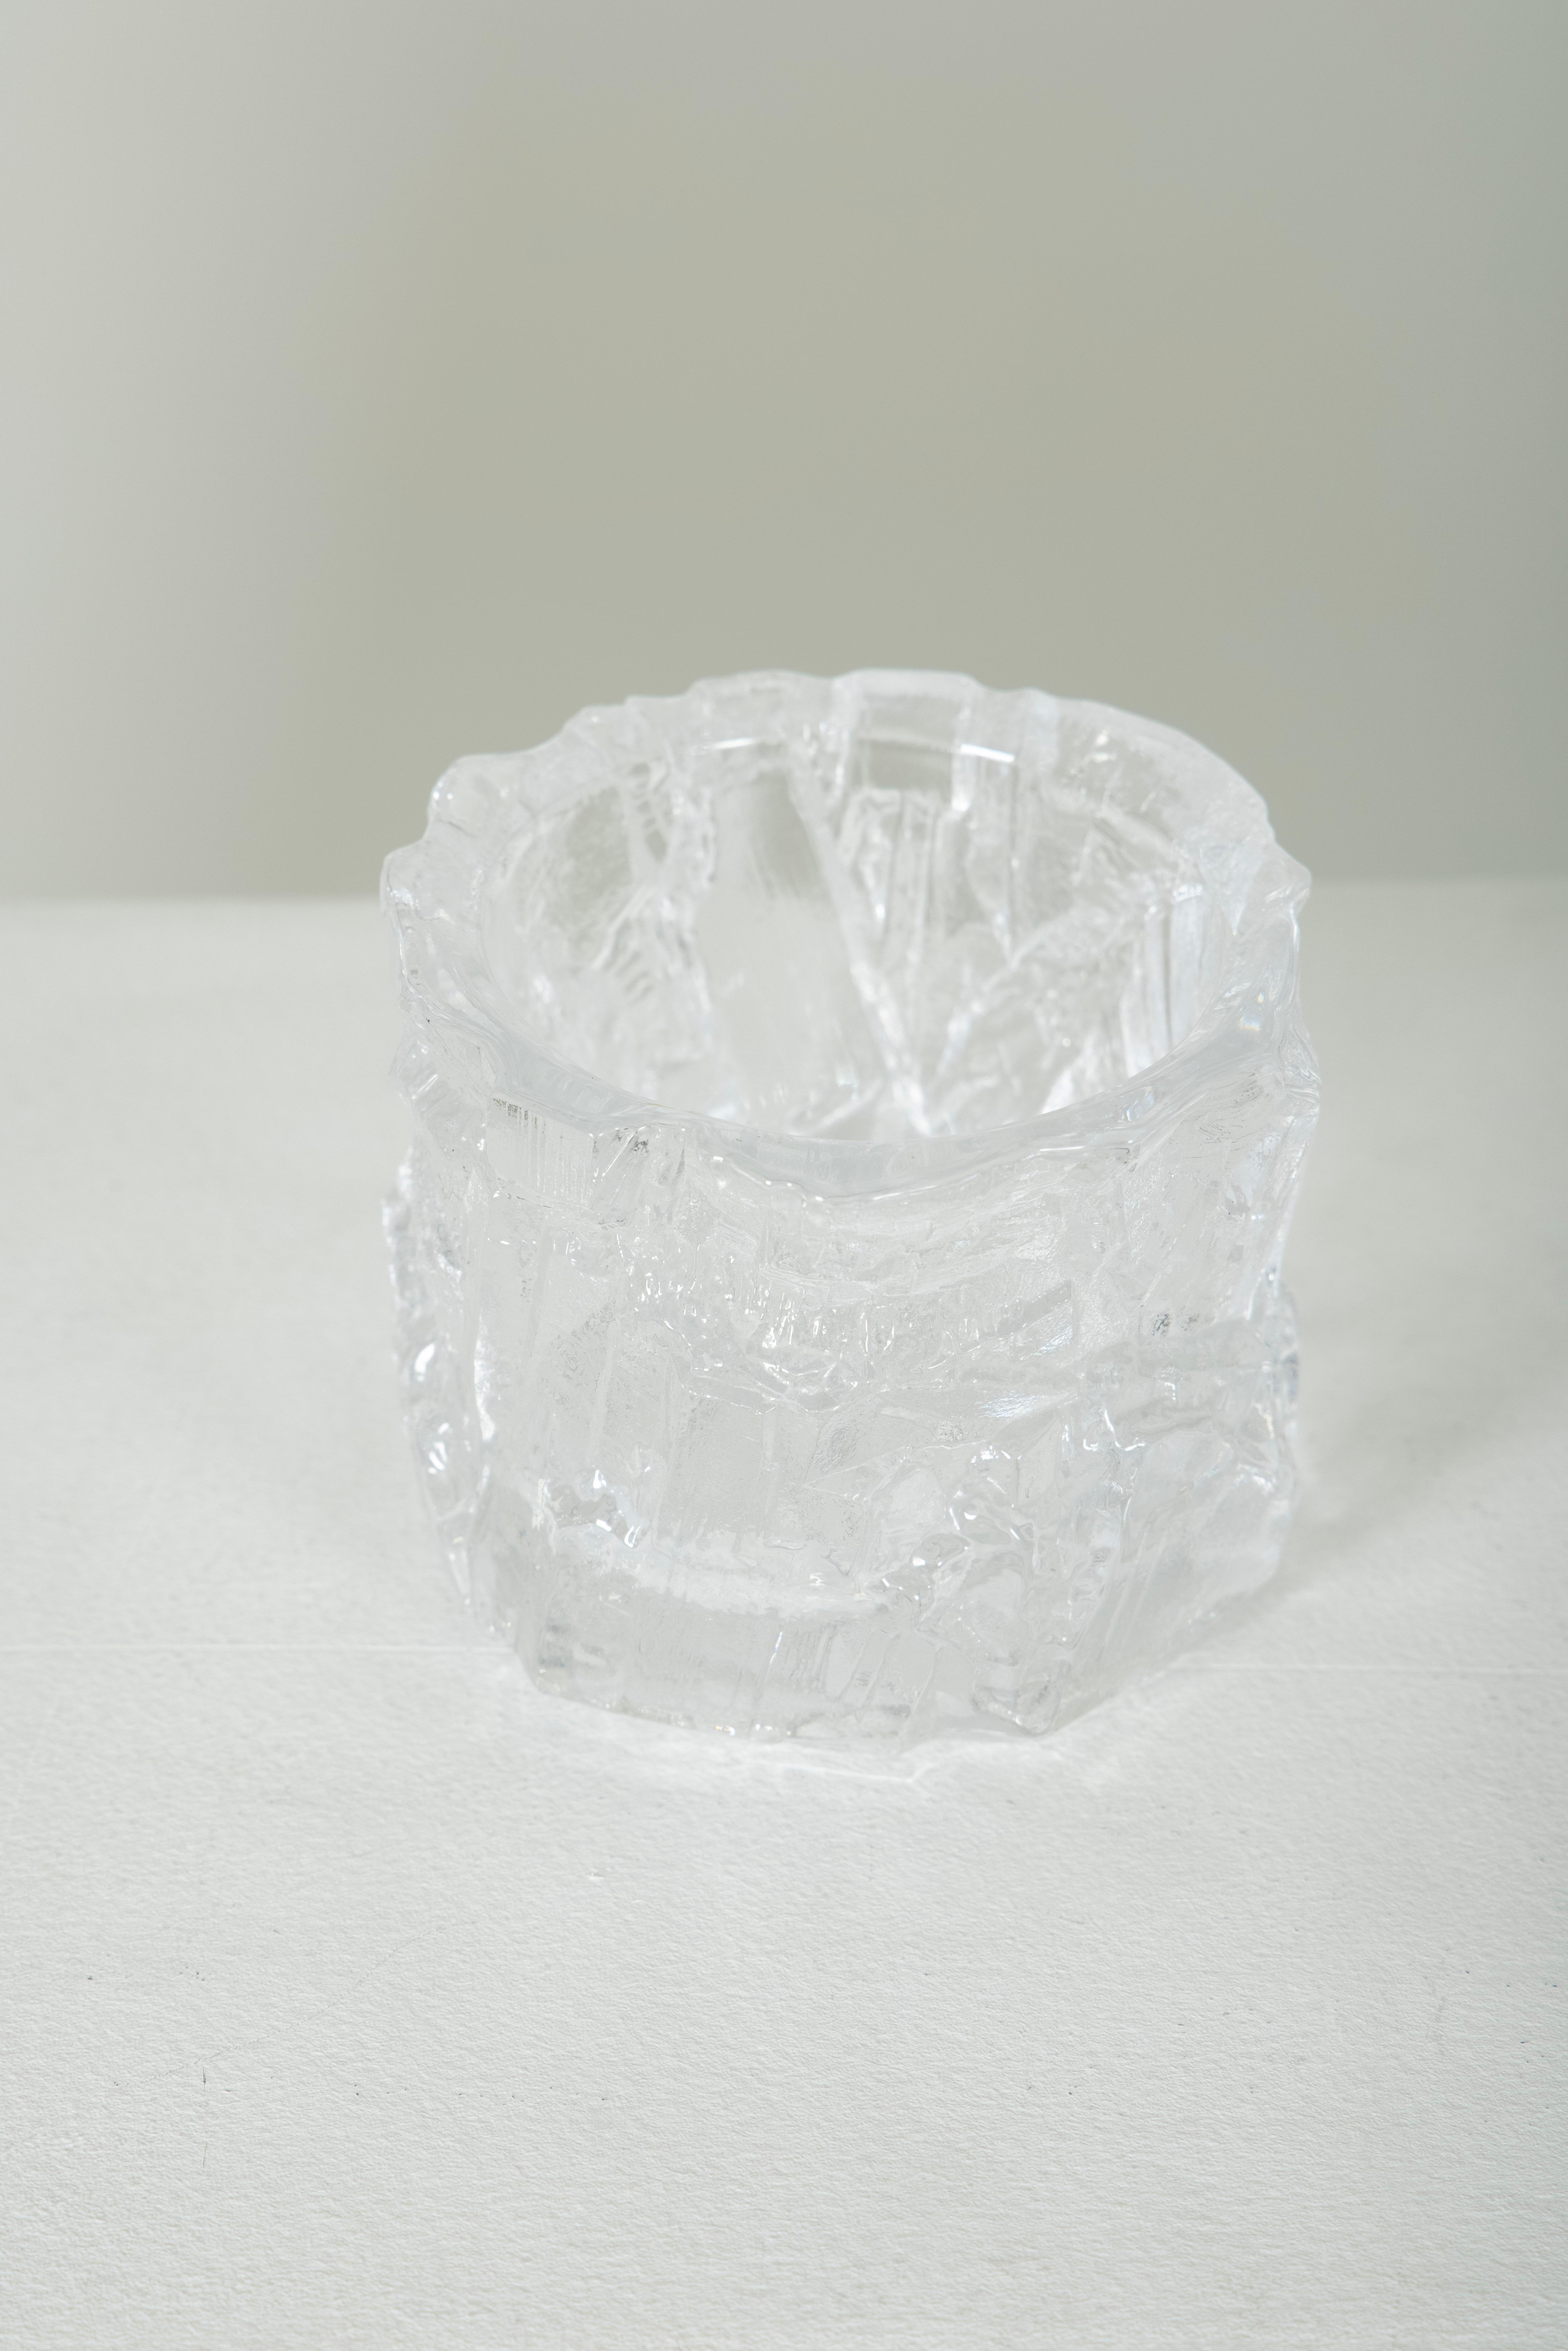 French Ice Crystals Effect Trinket Bowl in Daum's Crystal, France